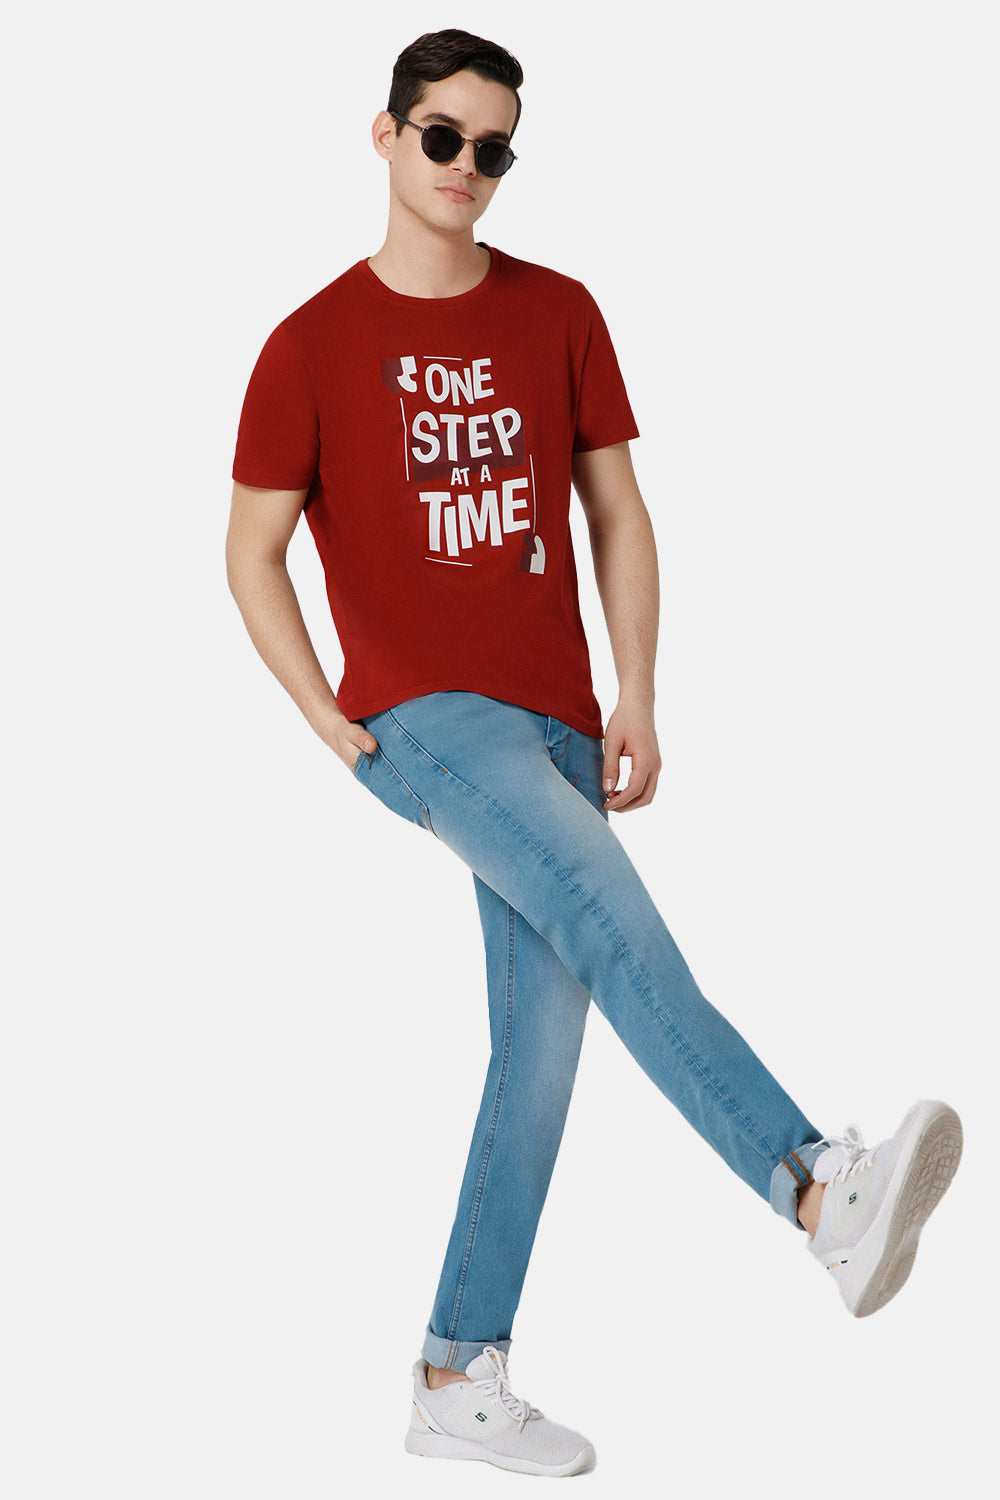 Enhance Printed Crew Neck Men's Casual T-Shirts - Red - TS21